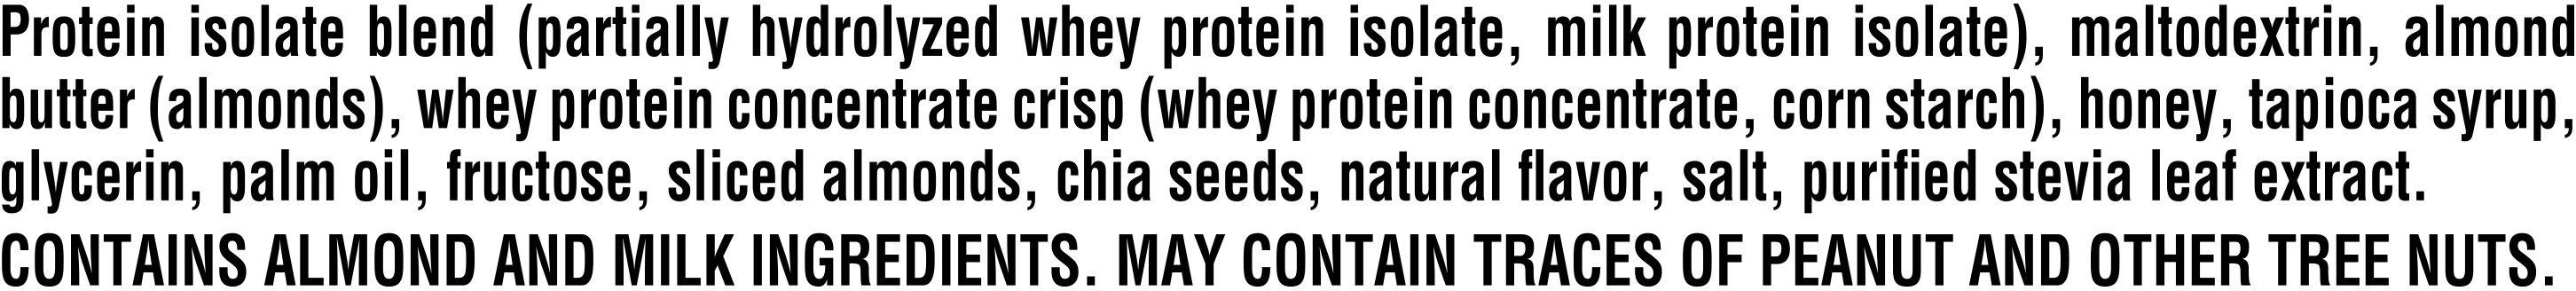 Image describing nutrition information for product Gatorade Whey Protein Bar with Almond Butter